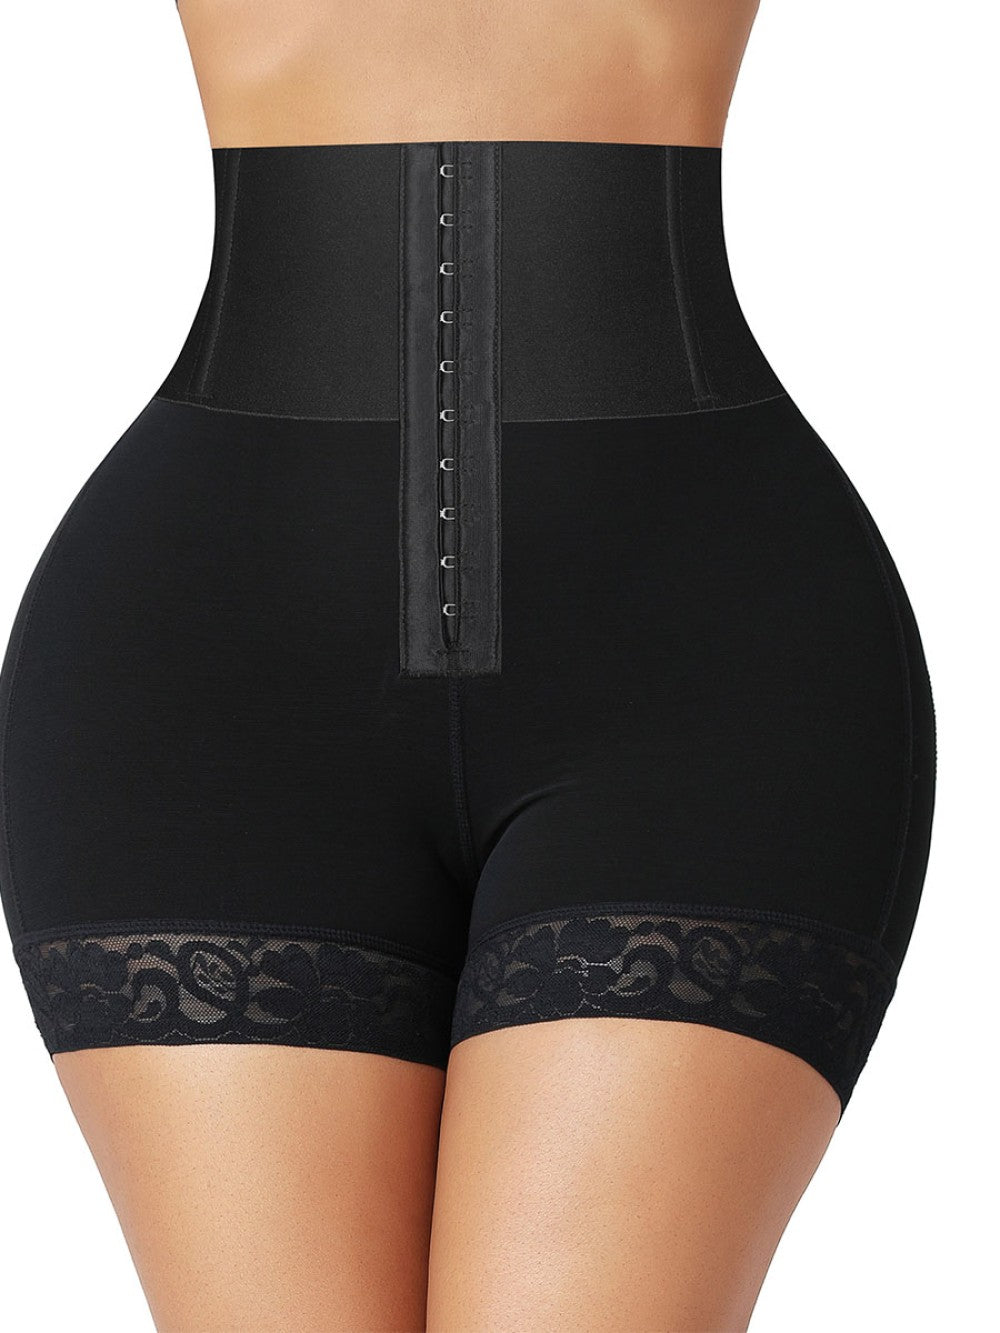 Women's Lace Body Shaper Breathable Slimming High Waisted